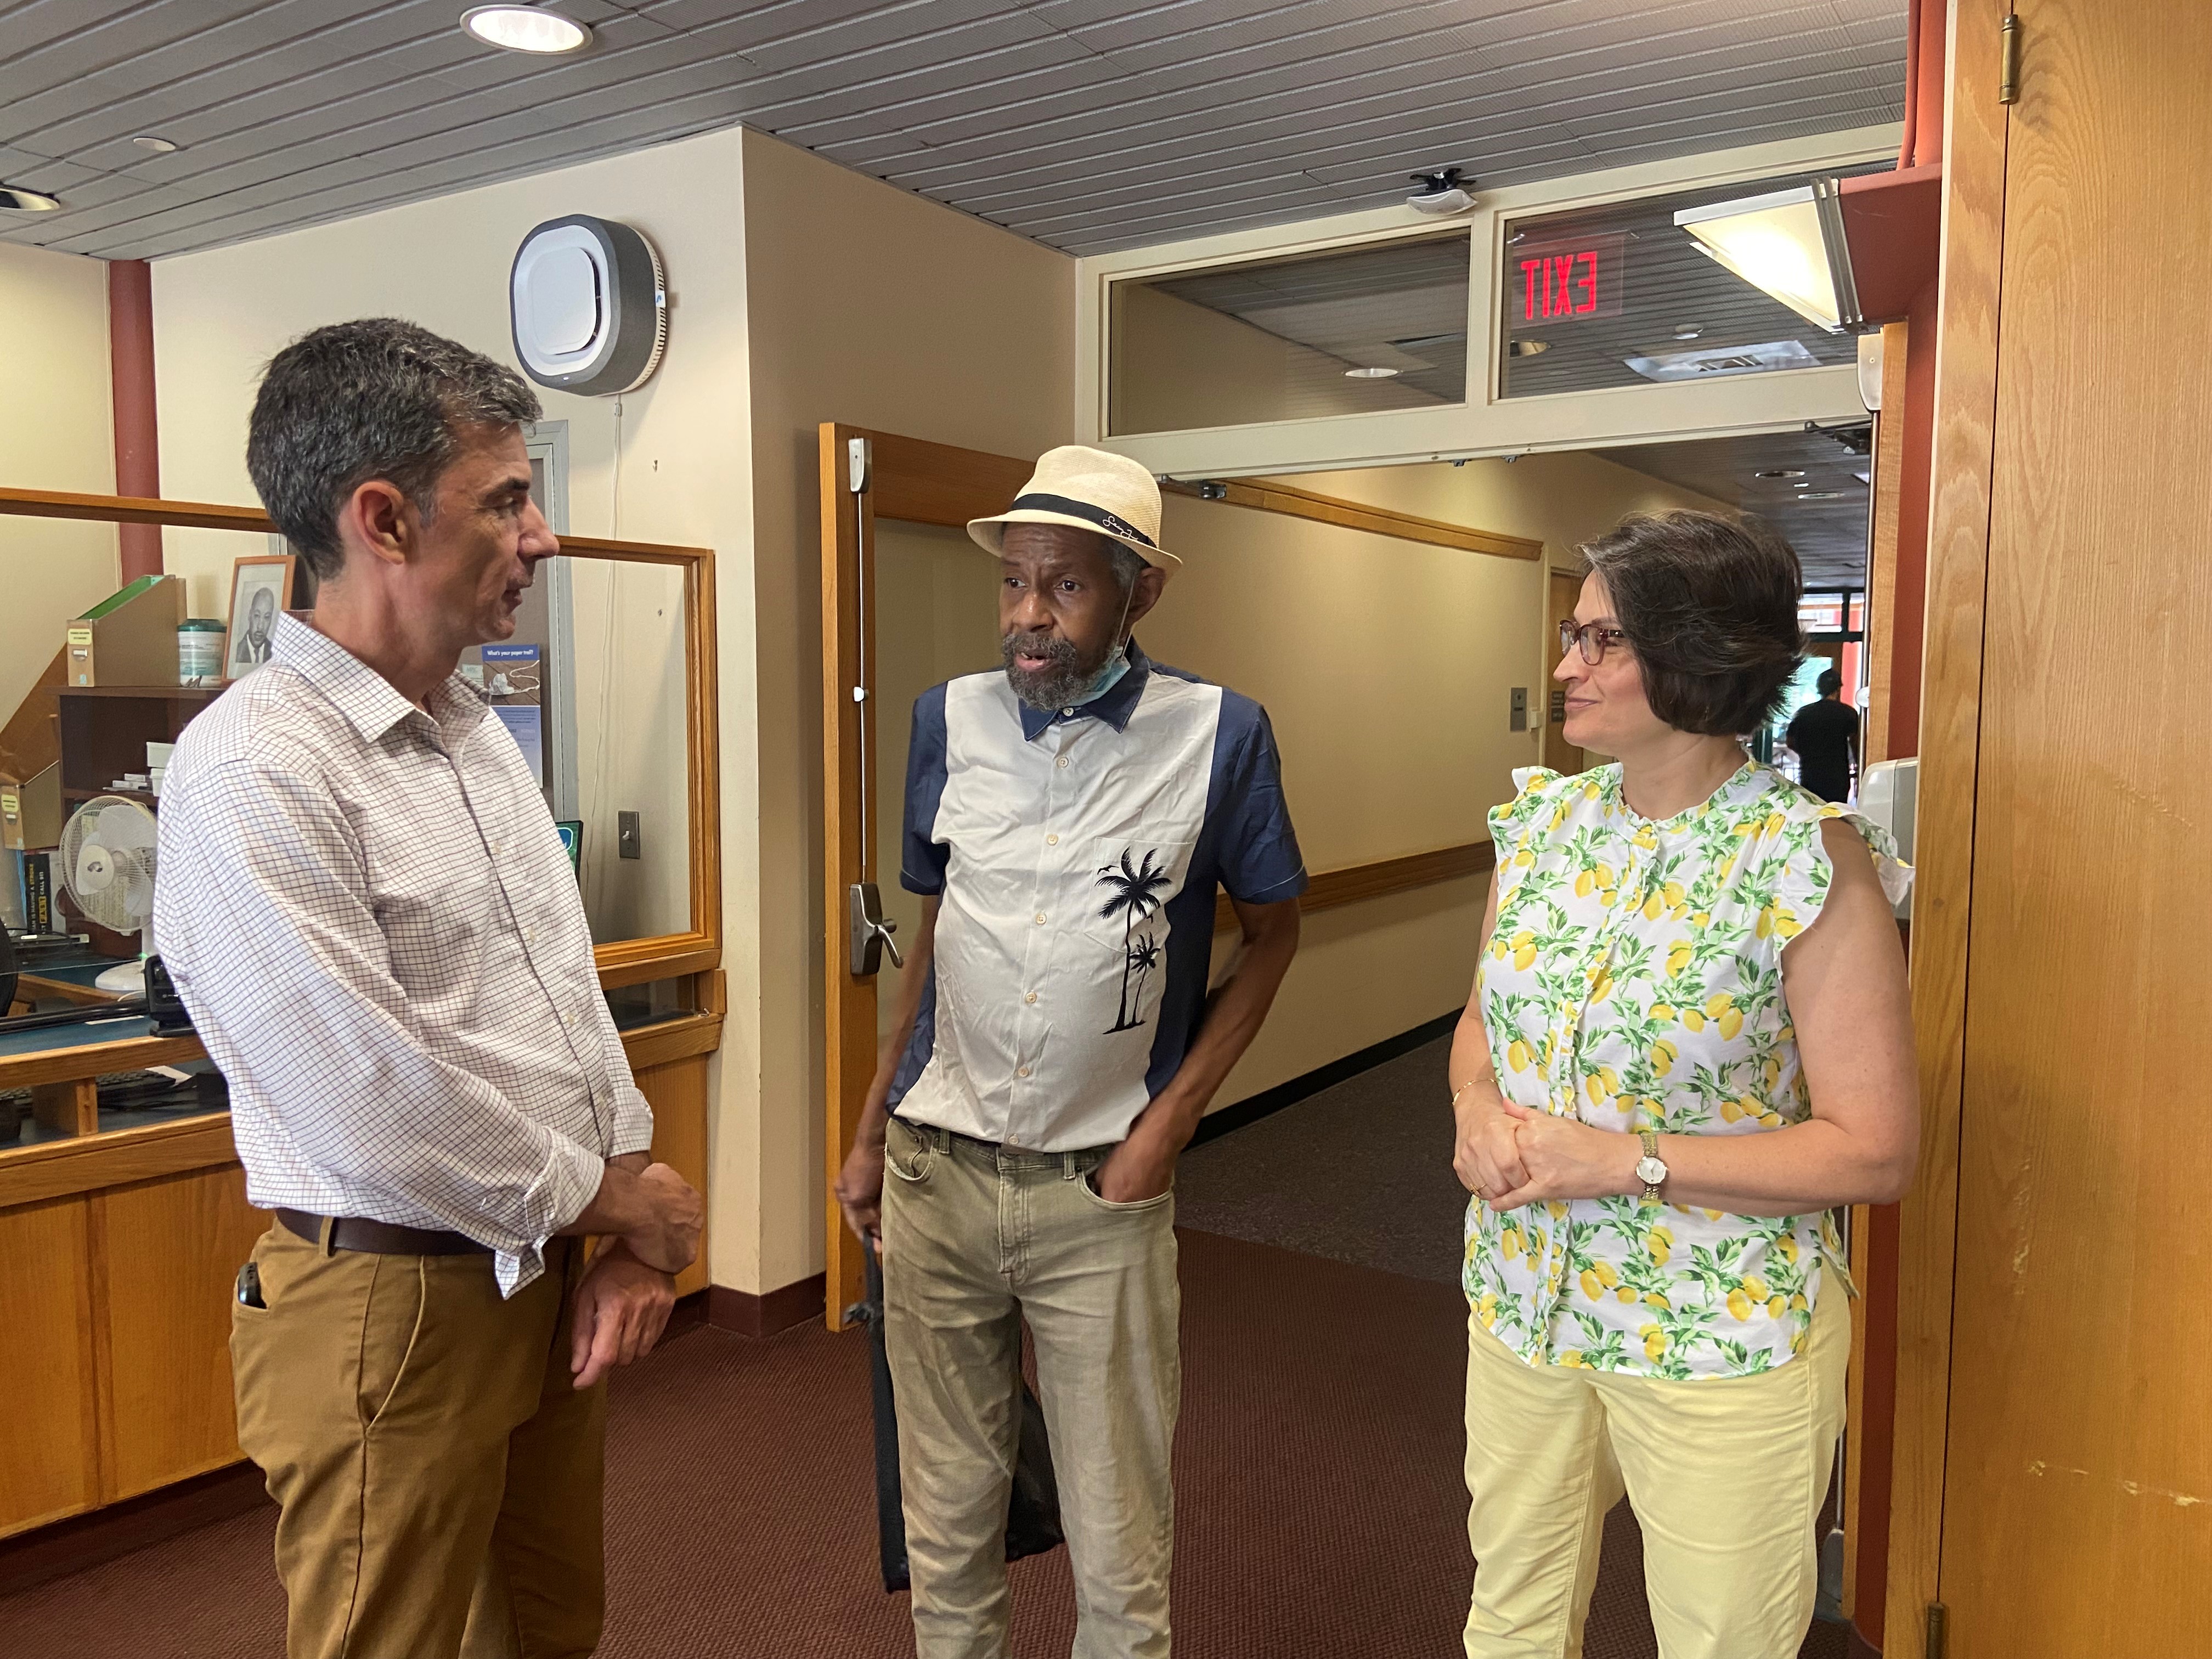 City Staff Support Provide Critical Support to Vulnerable Residents. Council on Aging Executive Director Susan Pacheco (right) and Director of Client Services Vincent McCarthy (left) greet a client of the Citywide Senior Center.